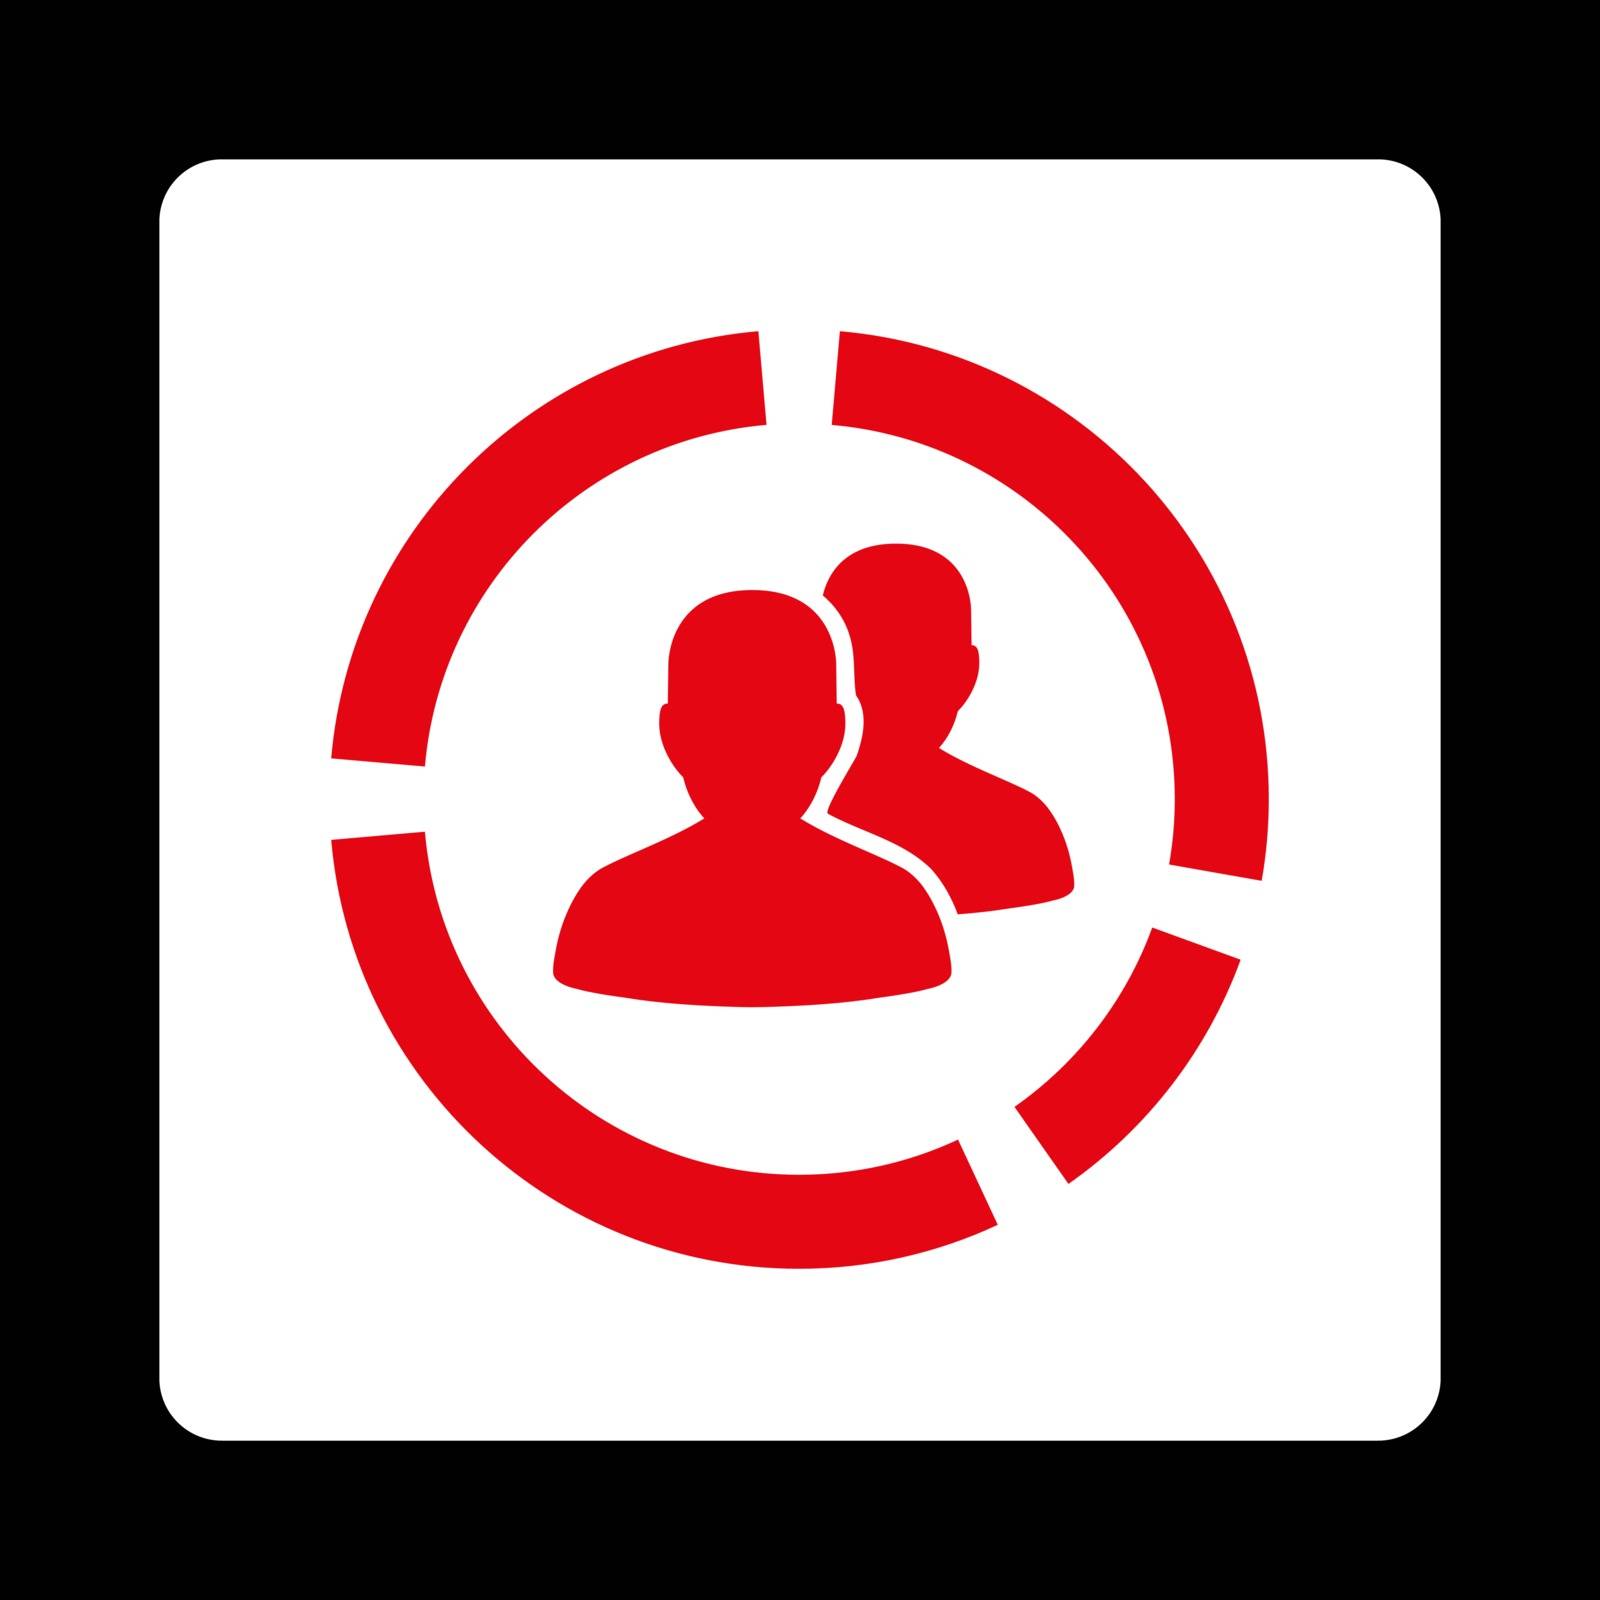 Demography Diagram vector icon. This flat rounded square button uses red and white colors and isolated on a black background.